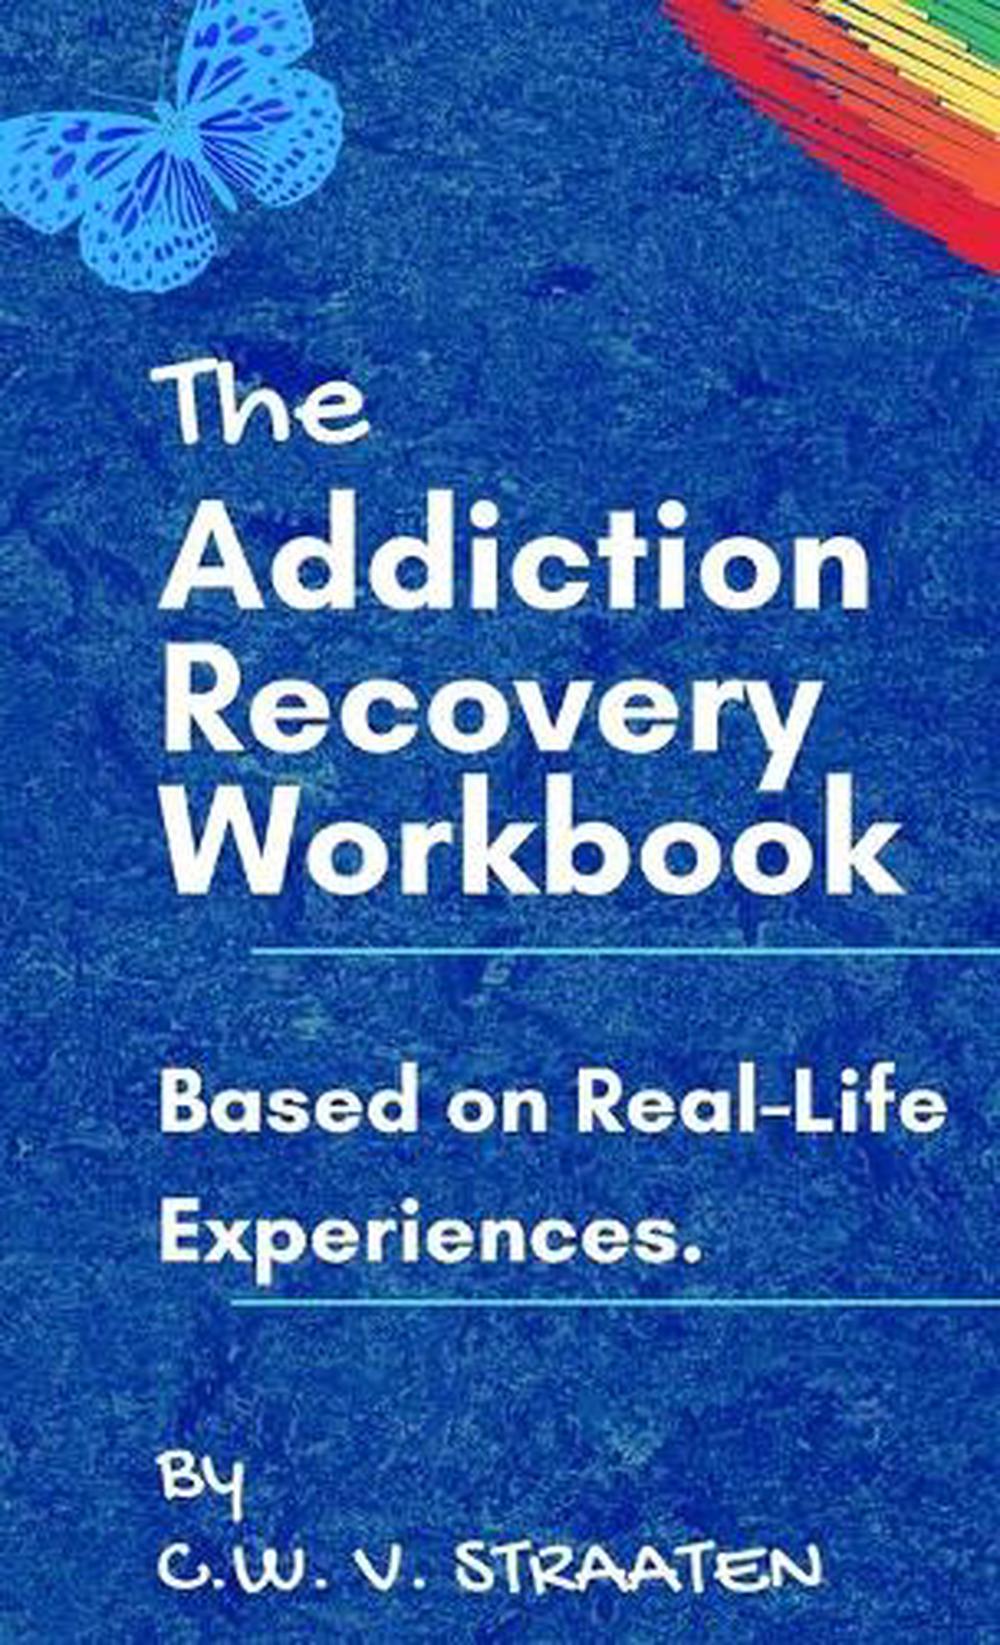 Addiction Recovery Workbook By Cw Straaten Hardcover Book Free Shipping 9789083022895 Ebay